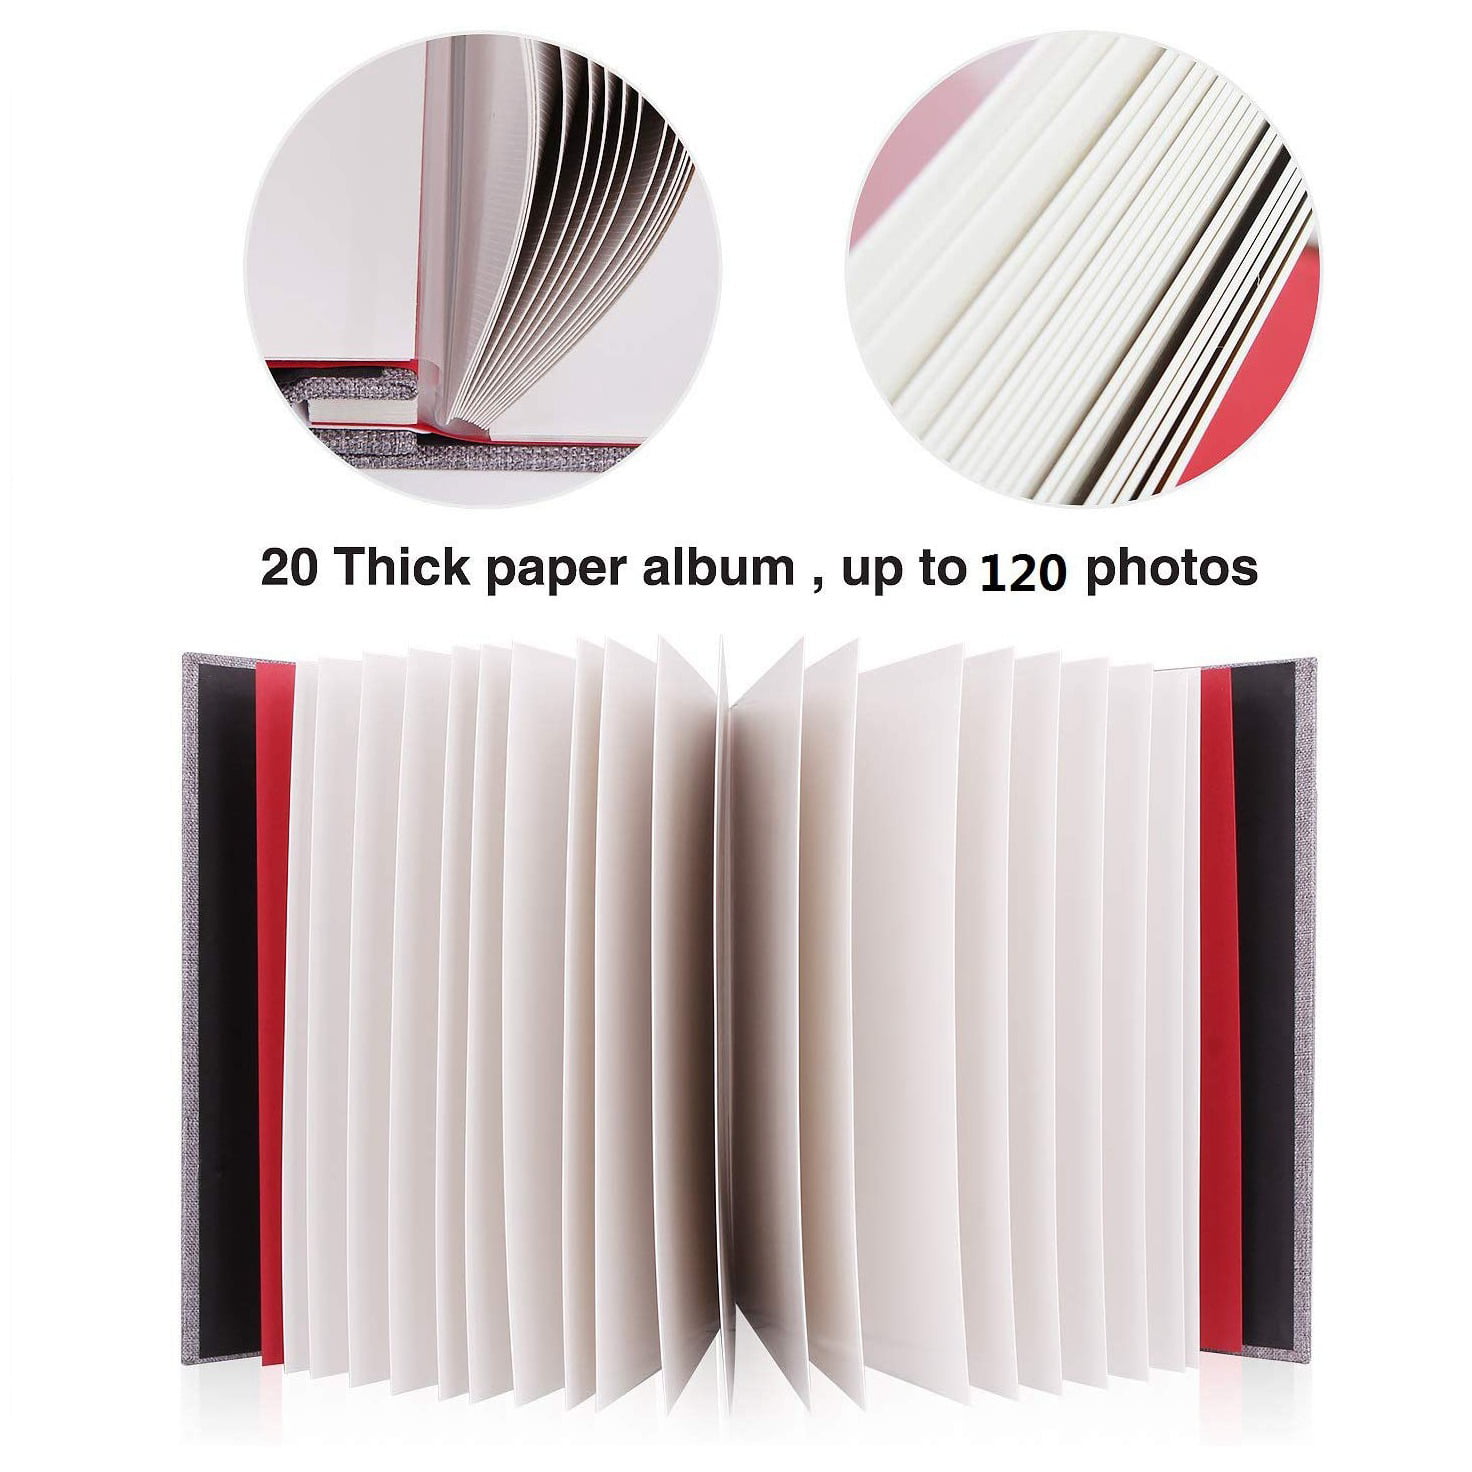 ZYL-YL Photo Album Scrapbook Linen Art DIY Memory Book Thick Pages with Protective Film Save Images Permanently,Best Gift Choice 